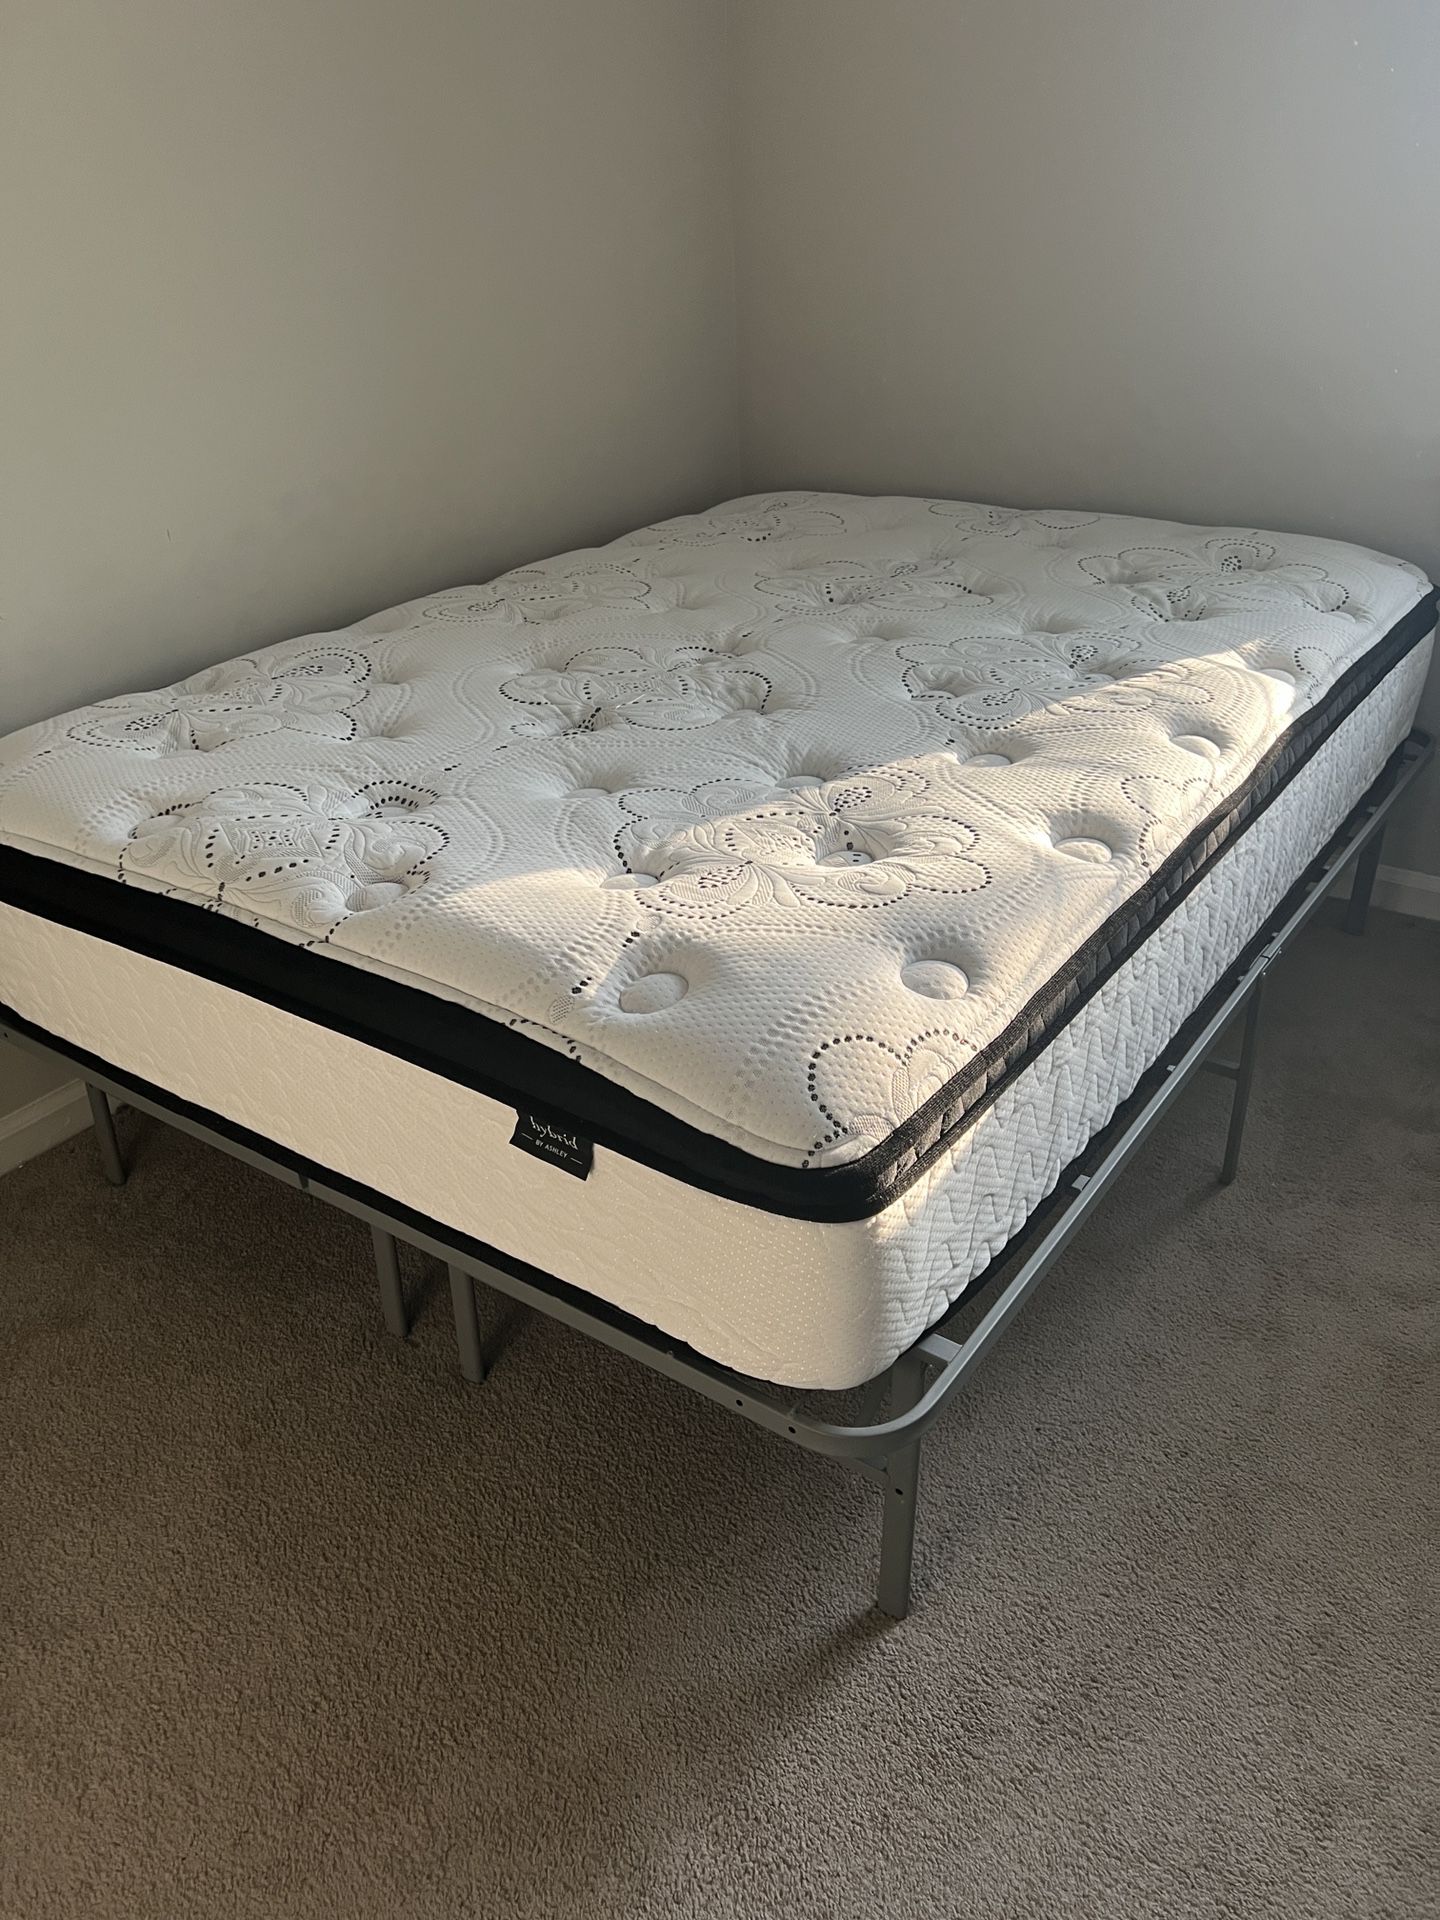 Full Size Mattress with Bed Frame/Metal Boxspring Combo From Ashley Furniture